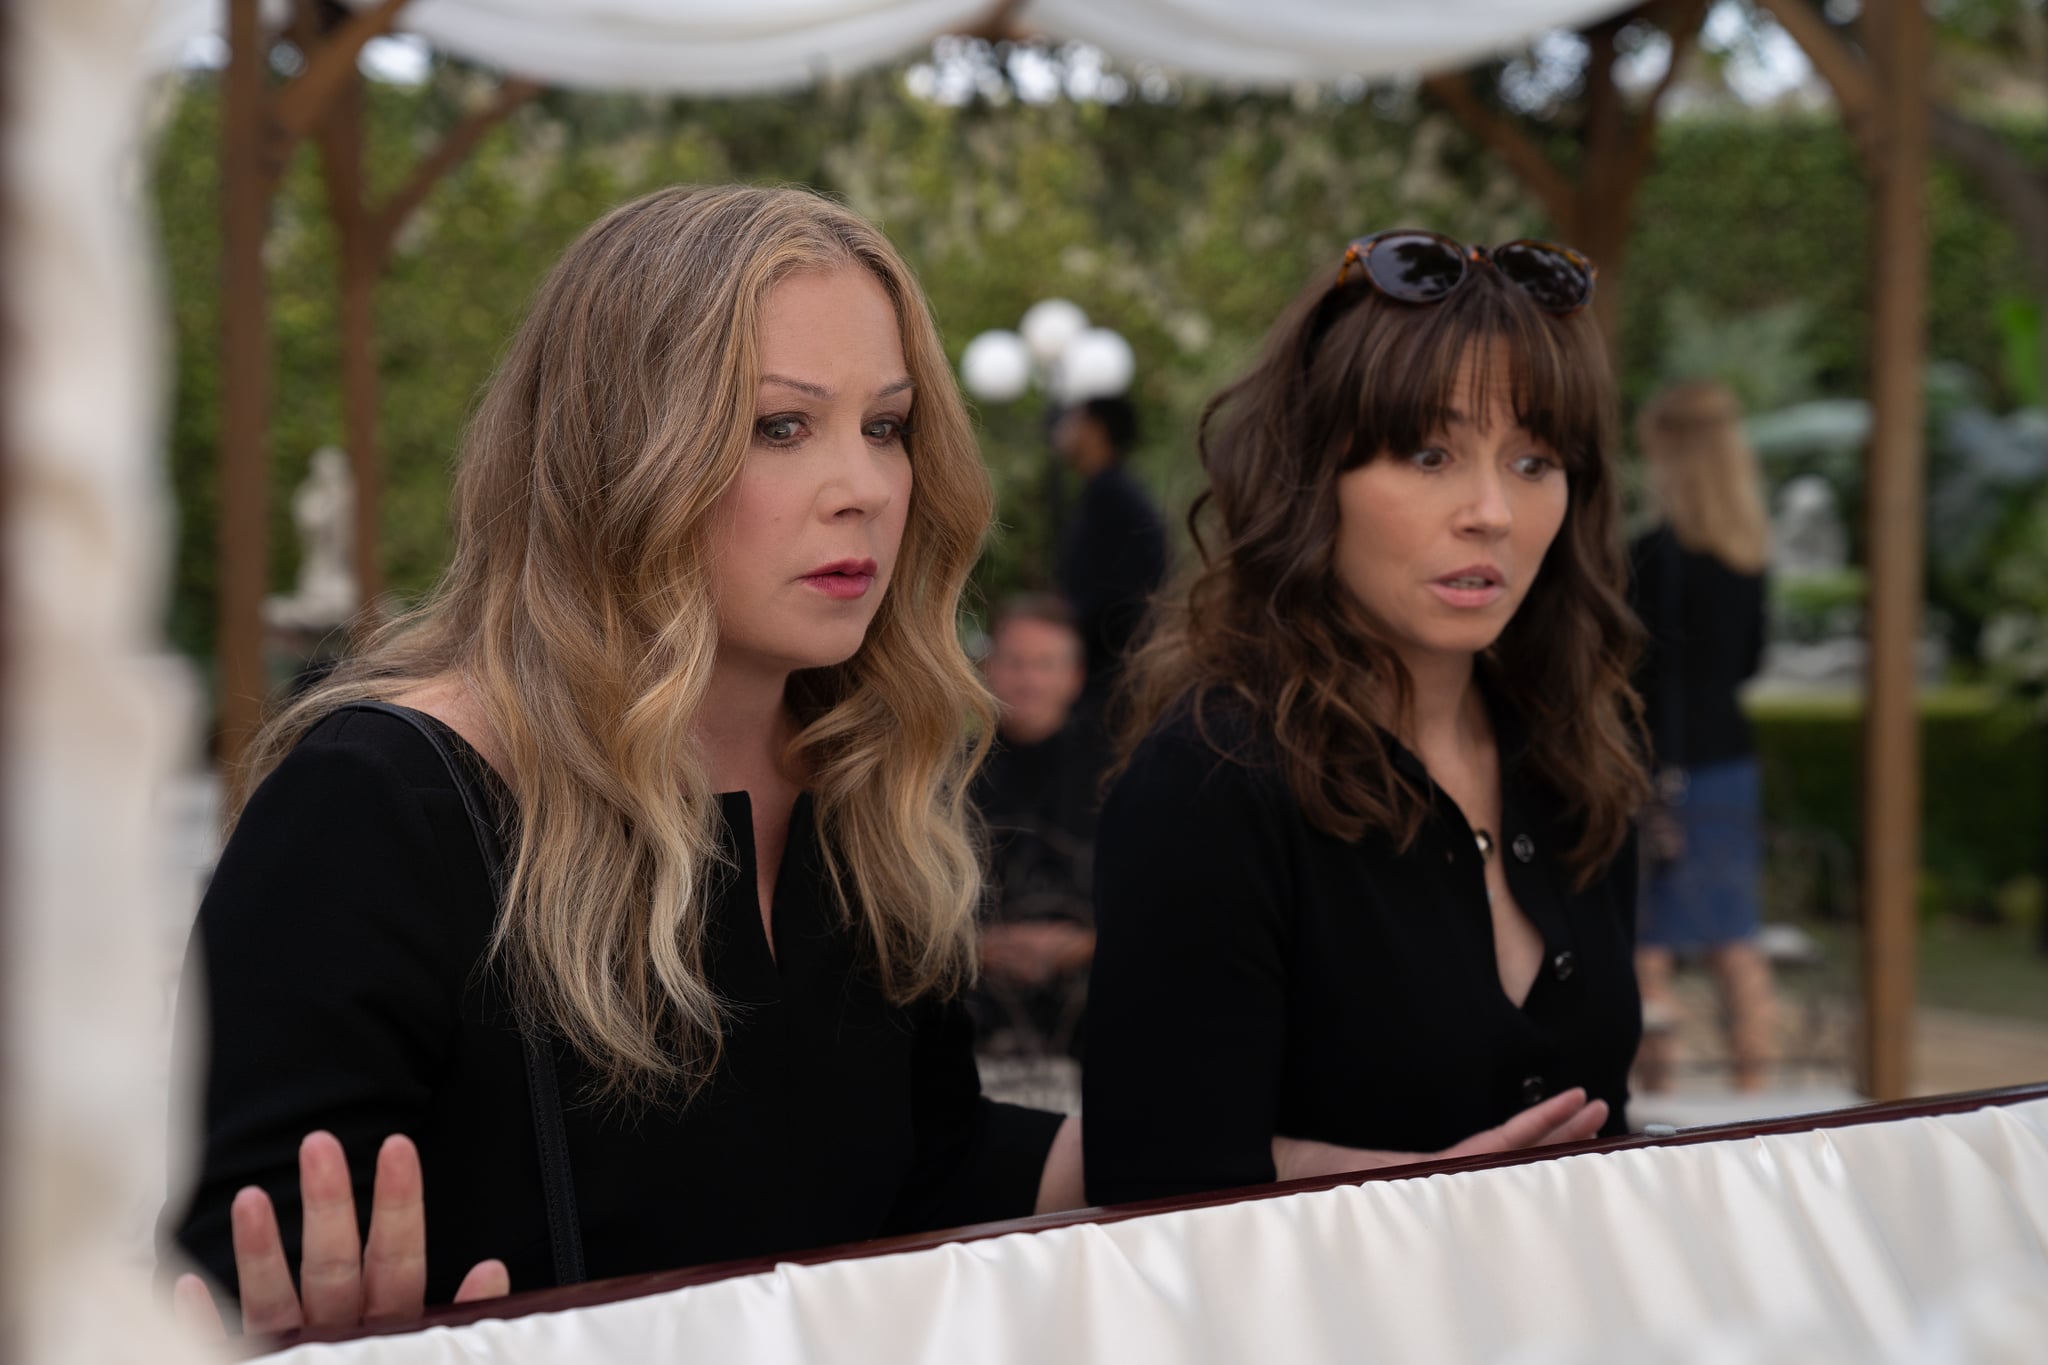 Jen and Judy Are Feeling Guilty About a Giant Secret in the Full “Dead to Me” Season 3 Trailer